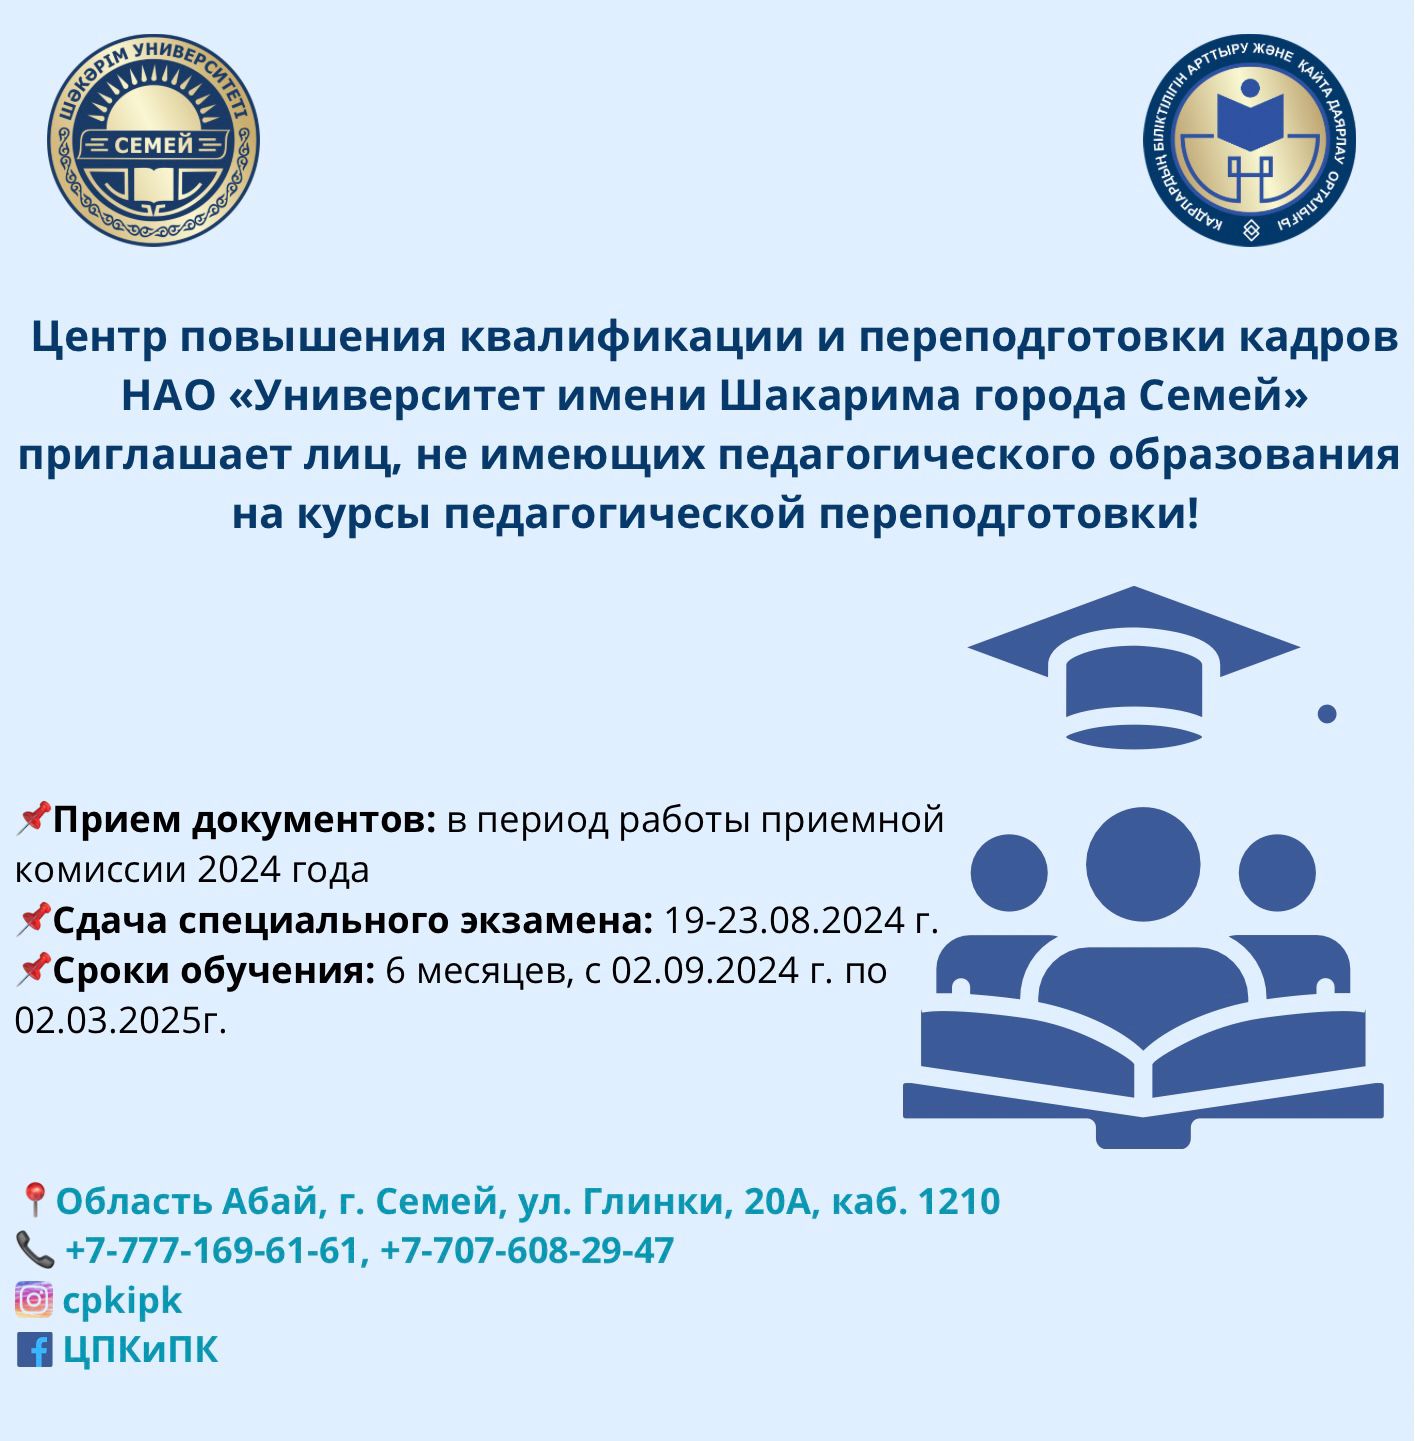 CENTER FOR ADVANCED TRAINING AND RETRAINING OF NAO "SHAKARIM UNIVERSITY OF SEMEY" INVITES PEOPLE WHO DO NOT HAVE A PEDAGOGICAL EDUCATION TO TAKE COURSES OF PEDAGOGICAL RETRAINING!